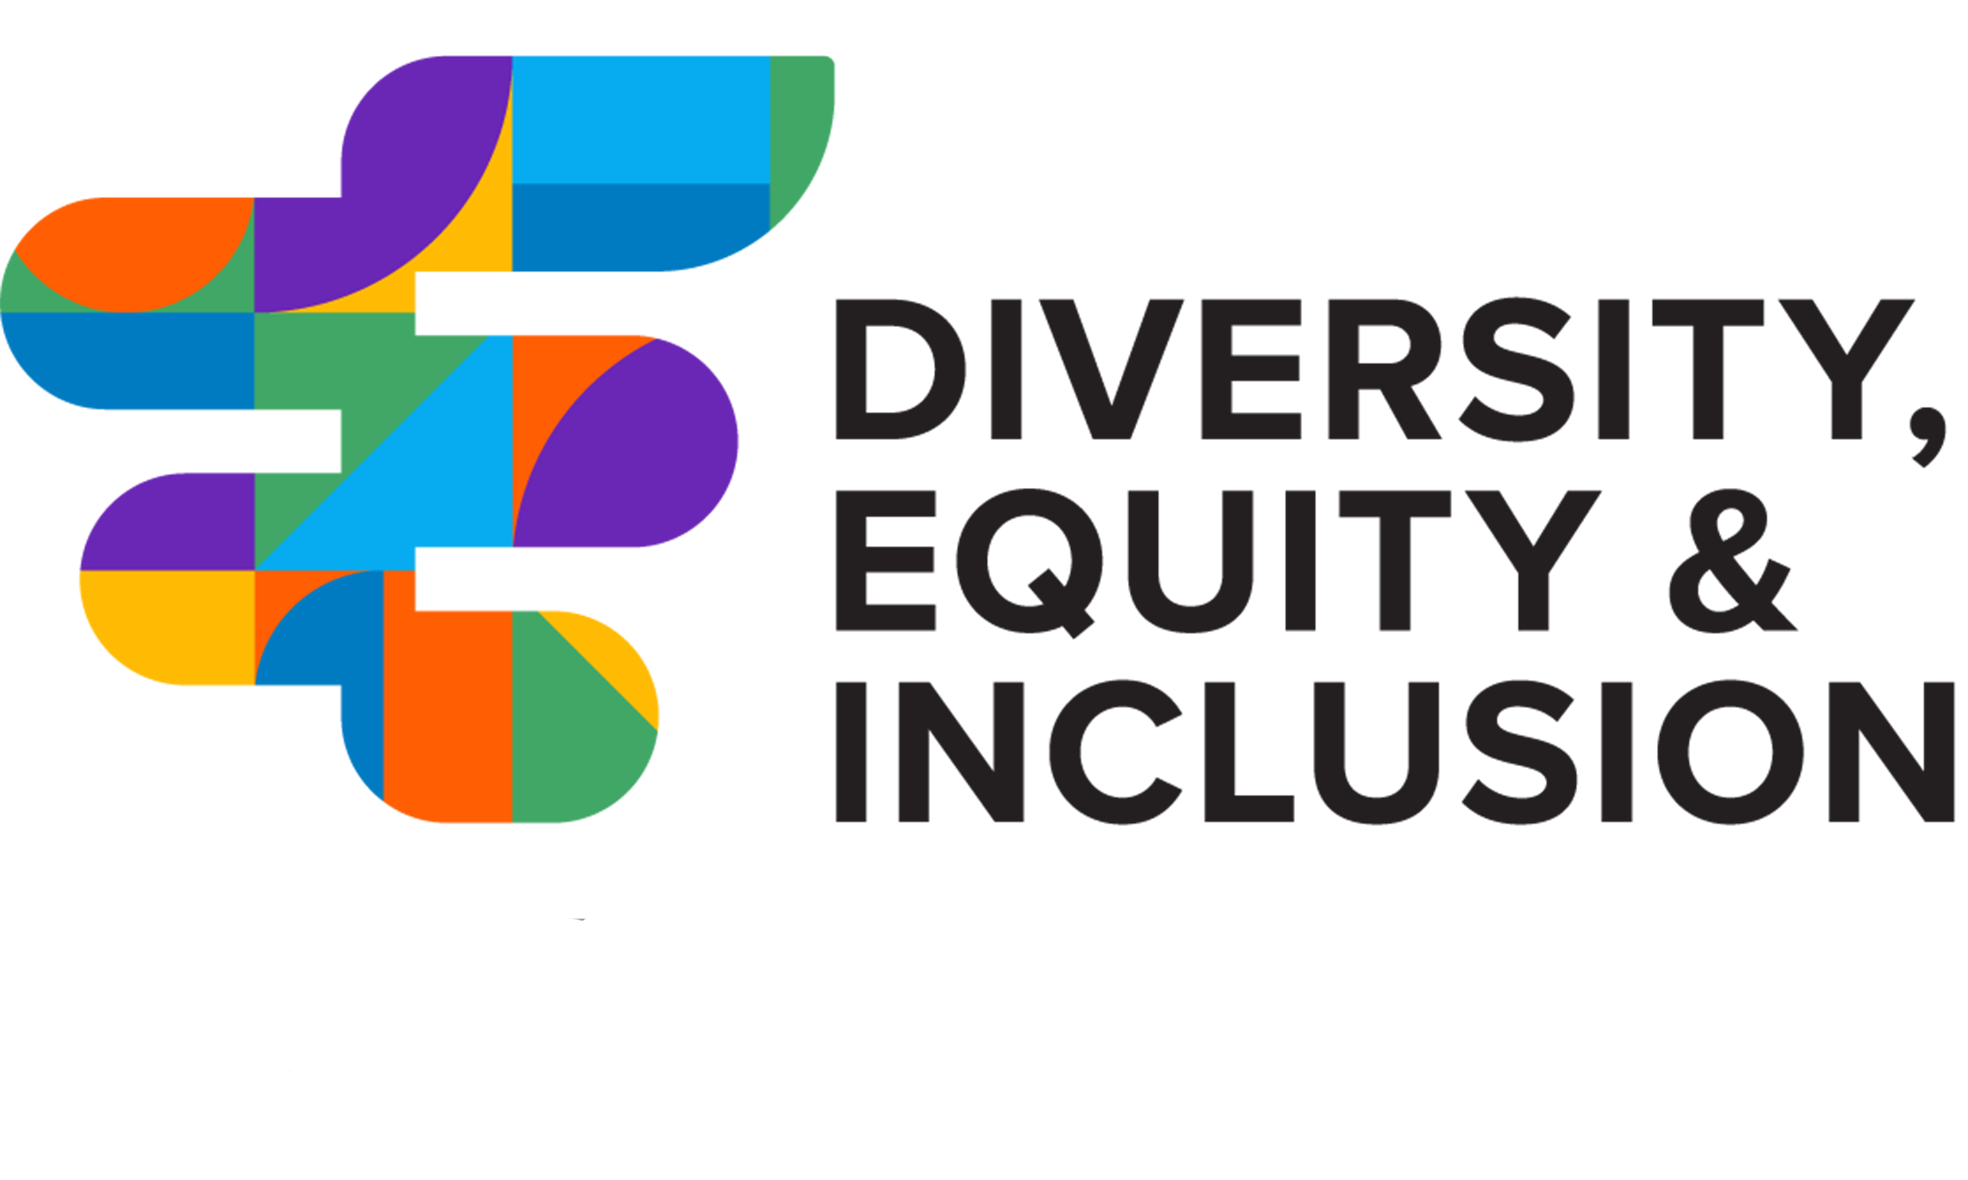 What Is Diversity Equity Inclusion